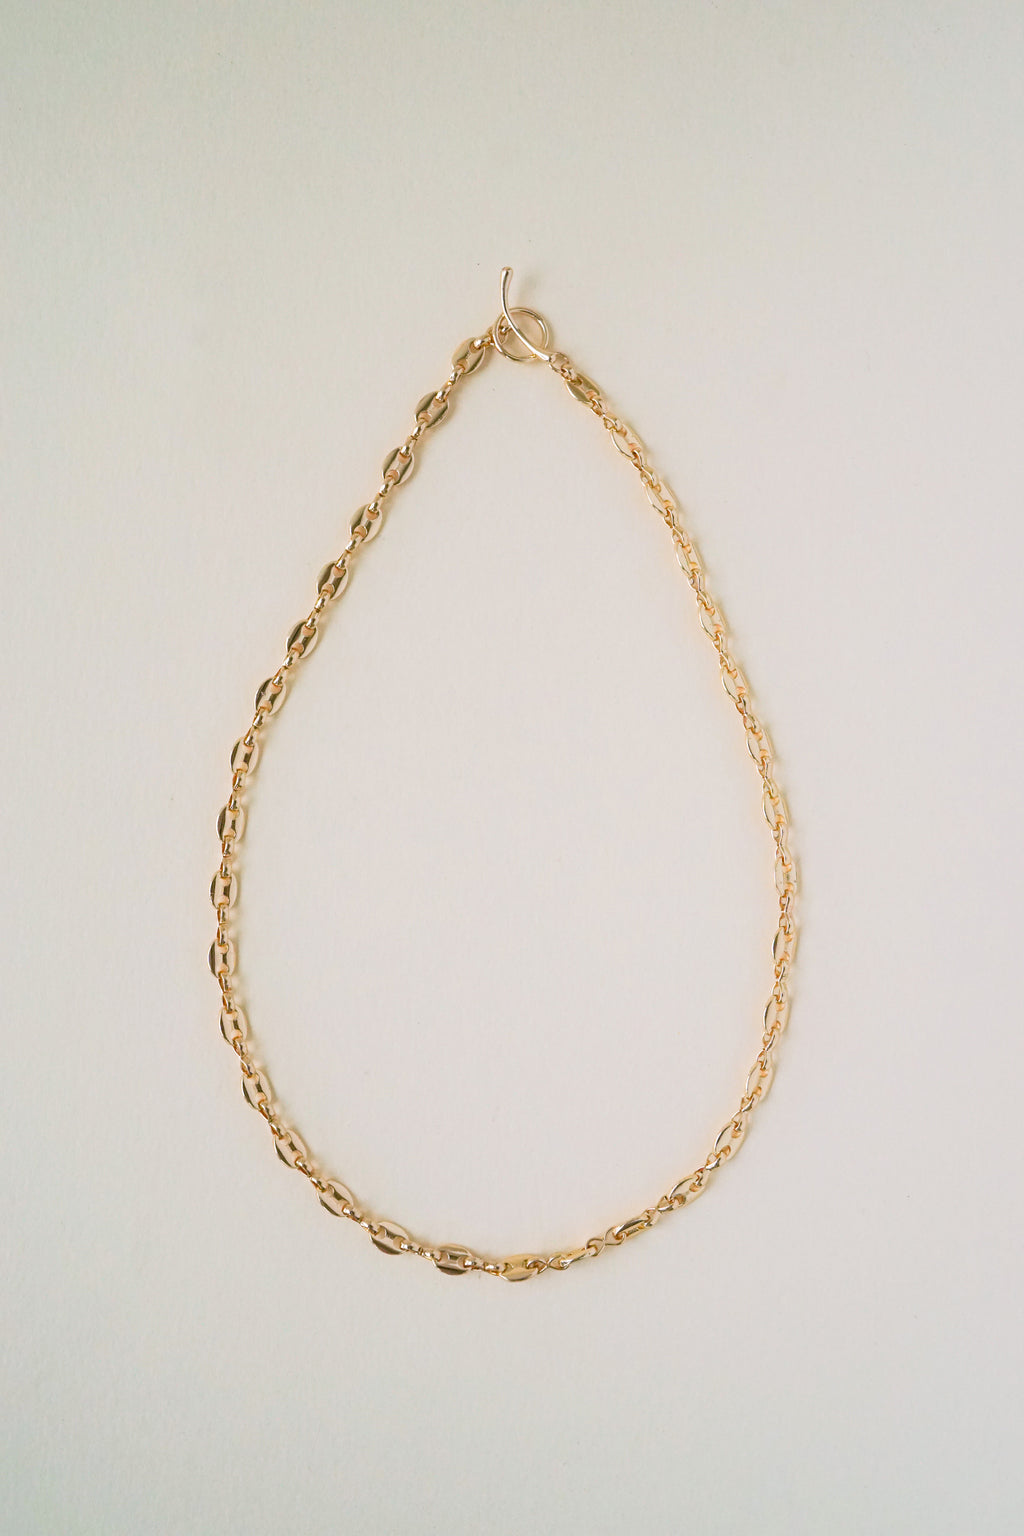 Coffee Bean Chunky Chain Necklace